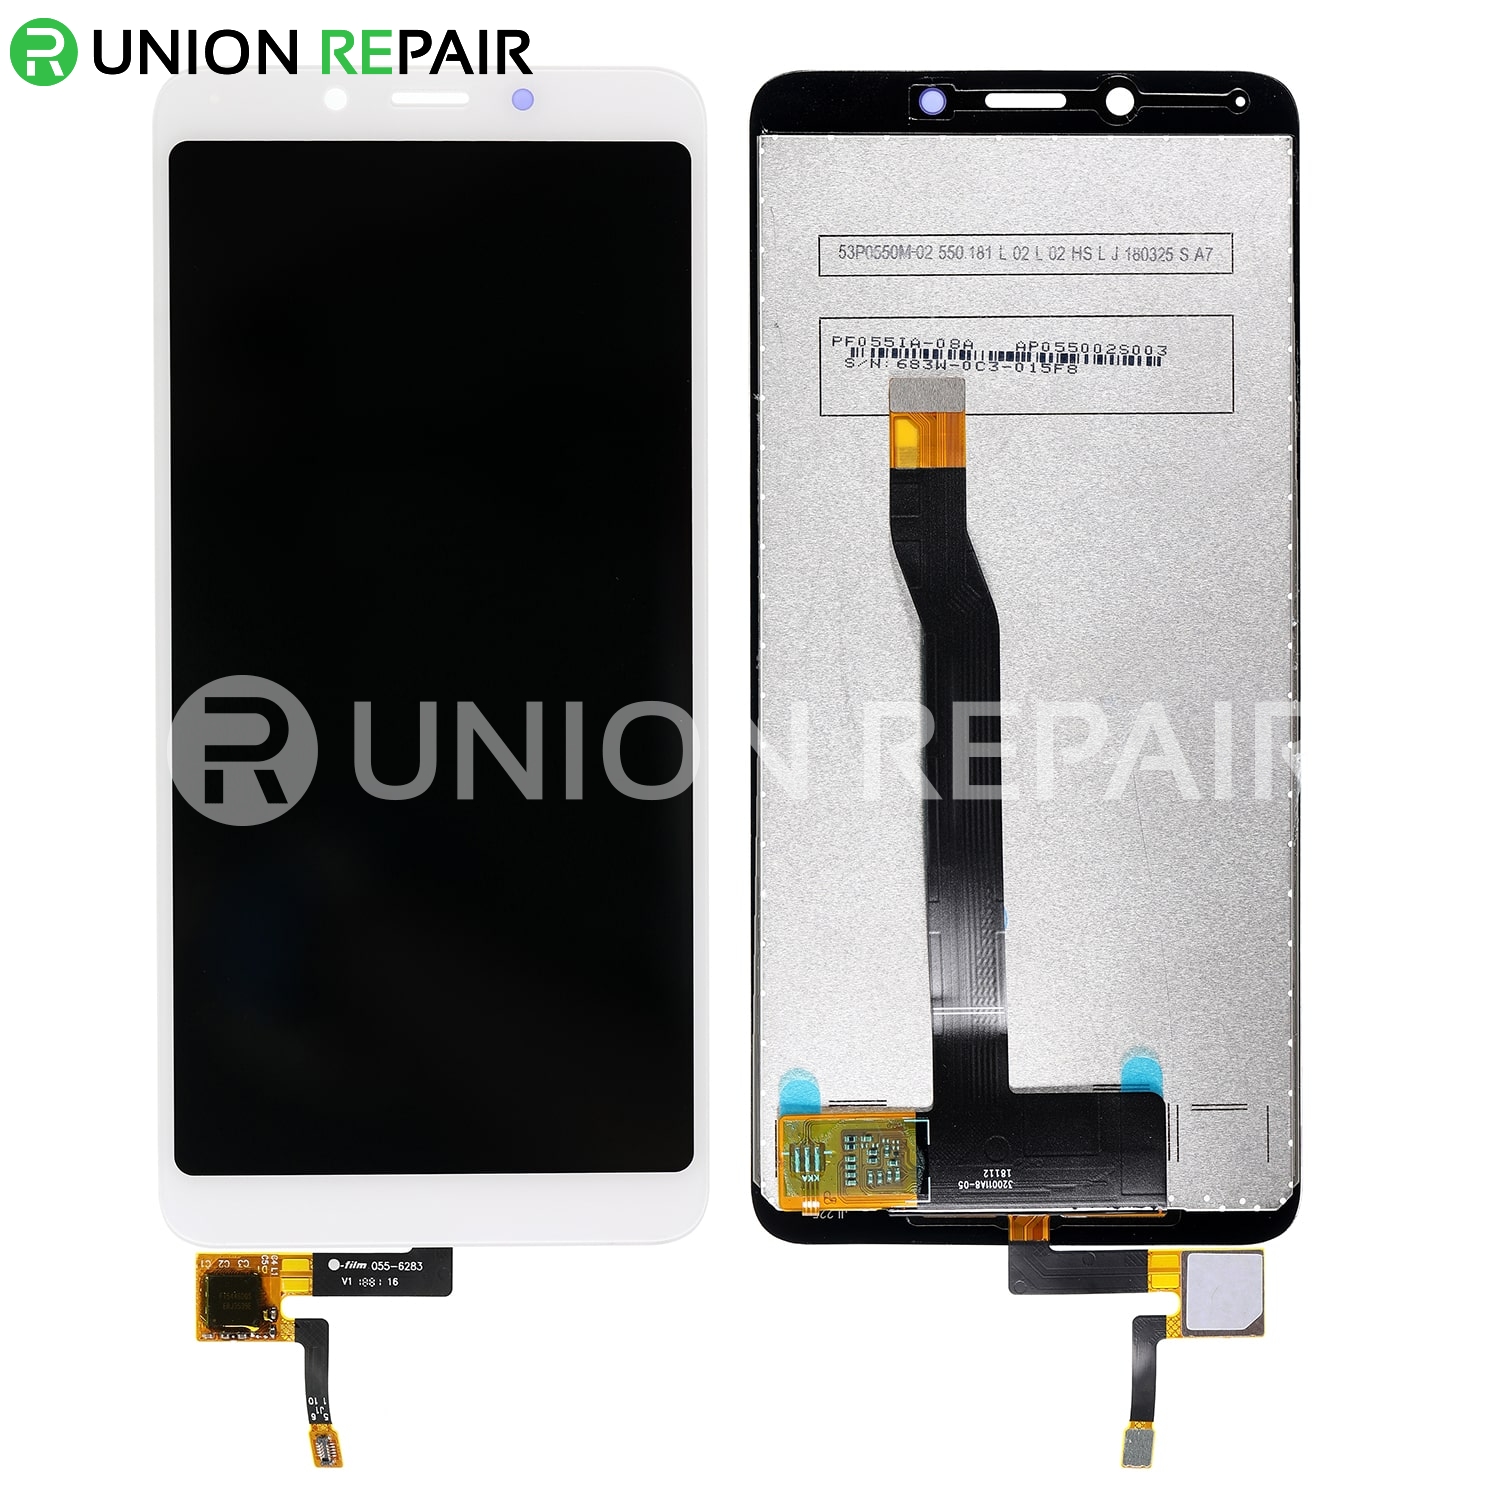 Replacement for RedMi 6 LCD Screen Digitizer - White